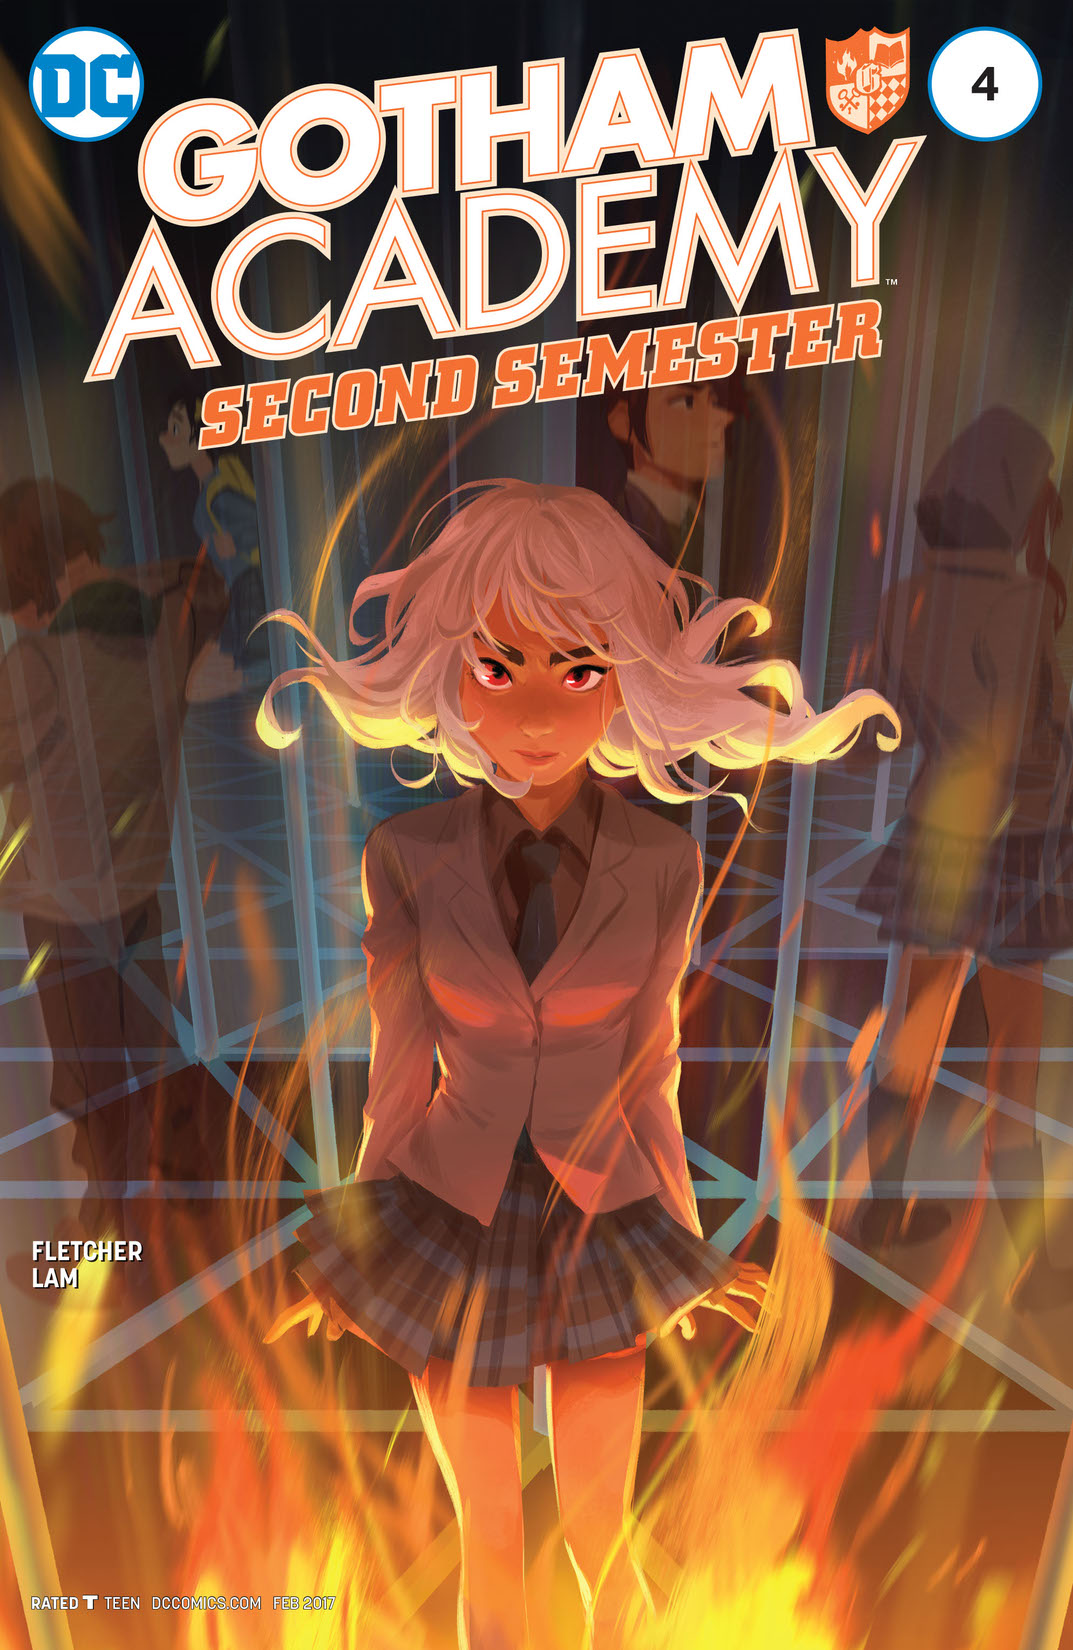 Gotham Academy: Second Semester #4 preview images